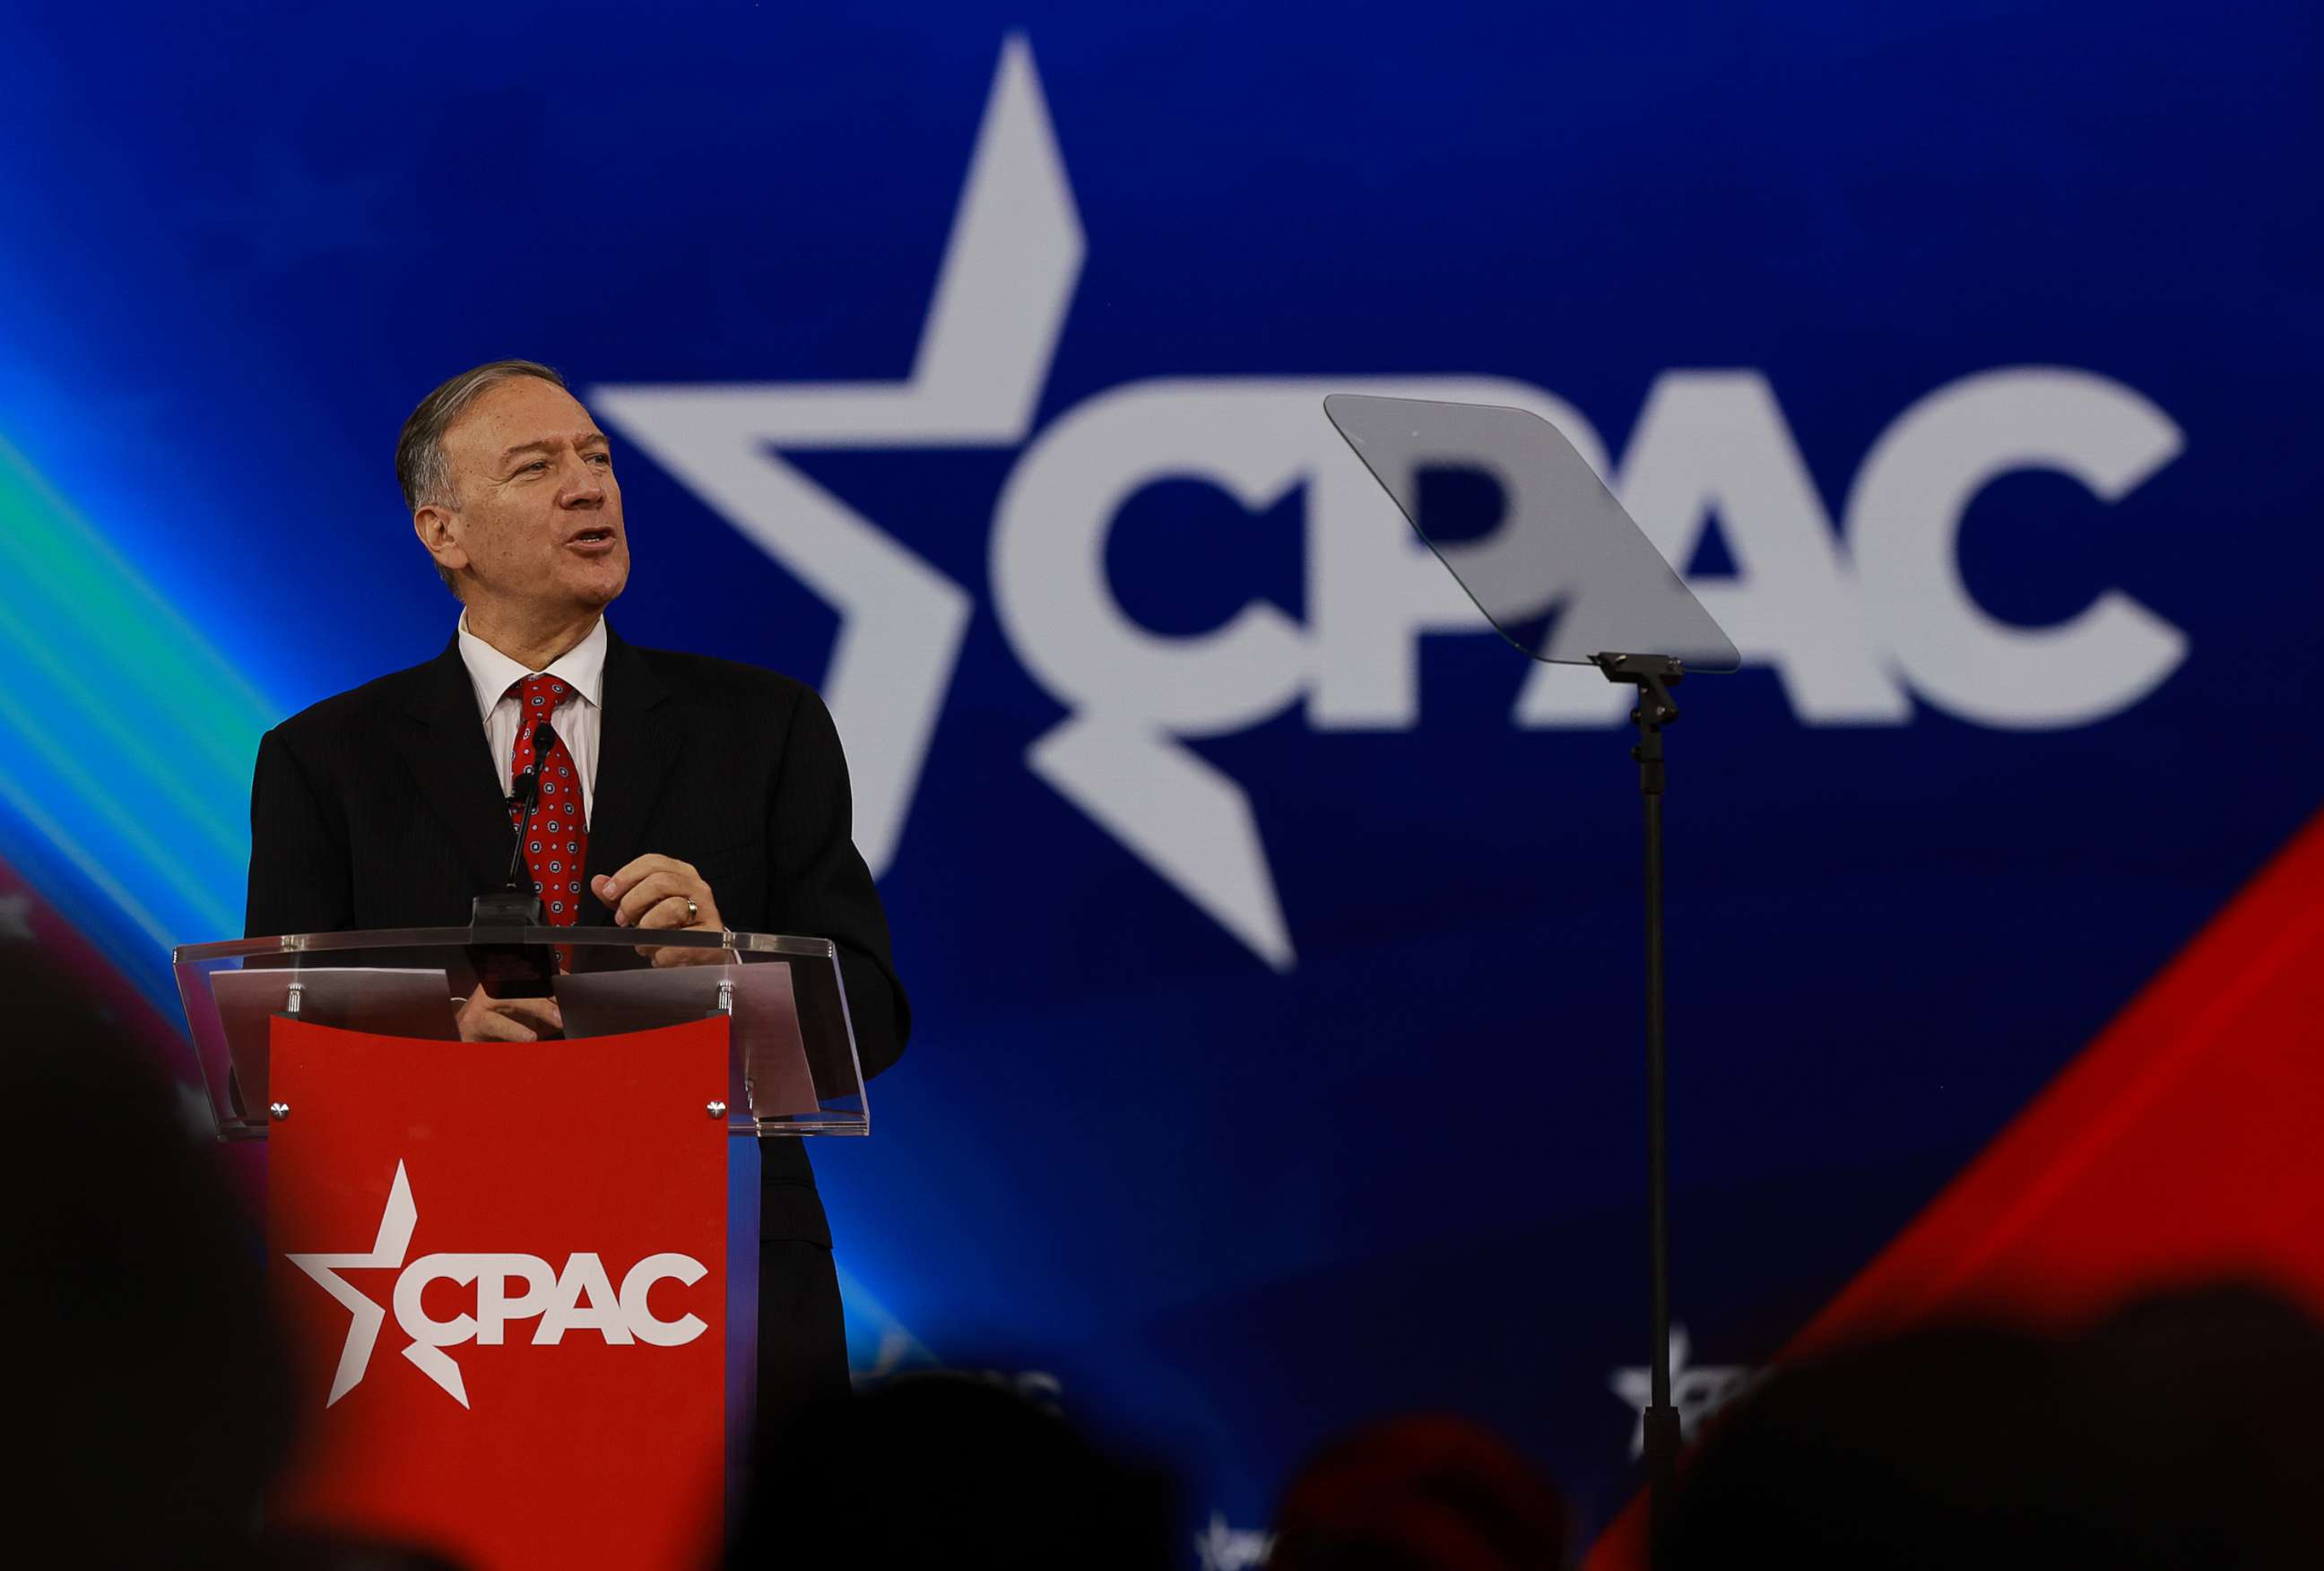 PHOTO: Former U.S. Secretary of State Mike Pompeo speaks during the Conservative Political Action Conference in Orlando, Fla., Feb. 25, 2022.